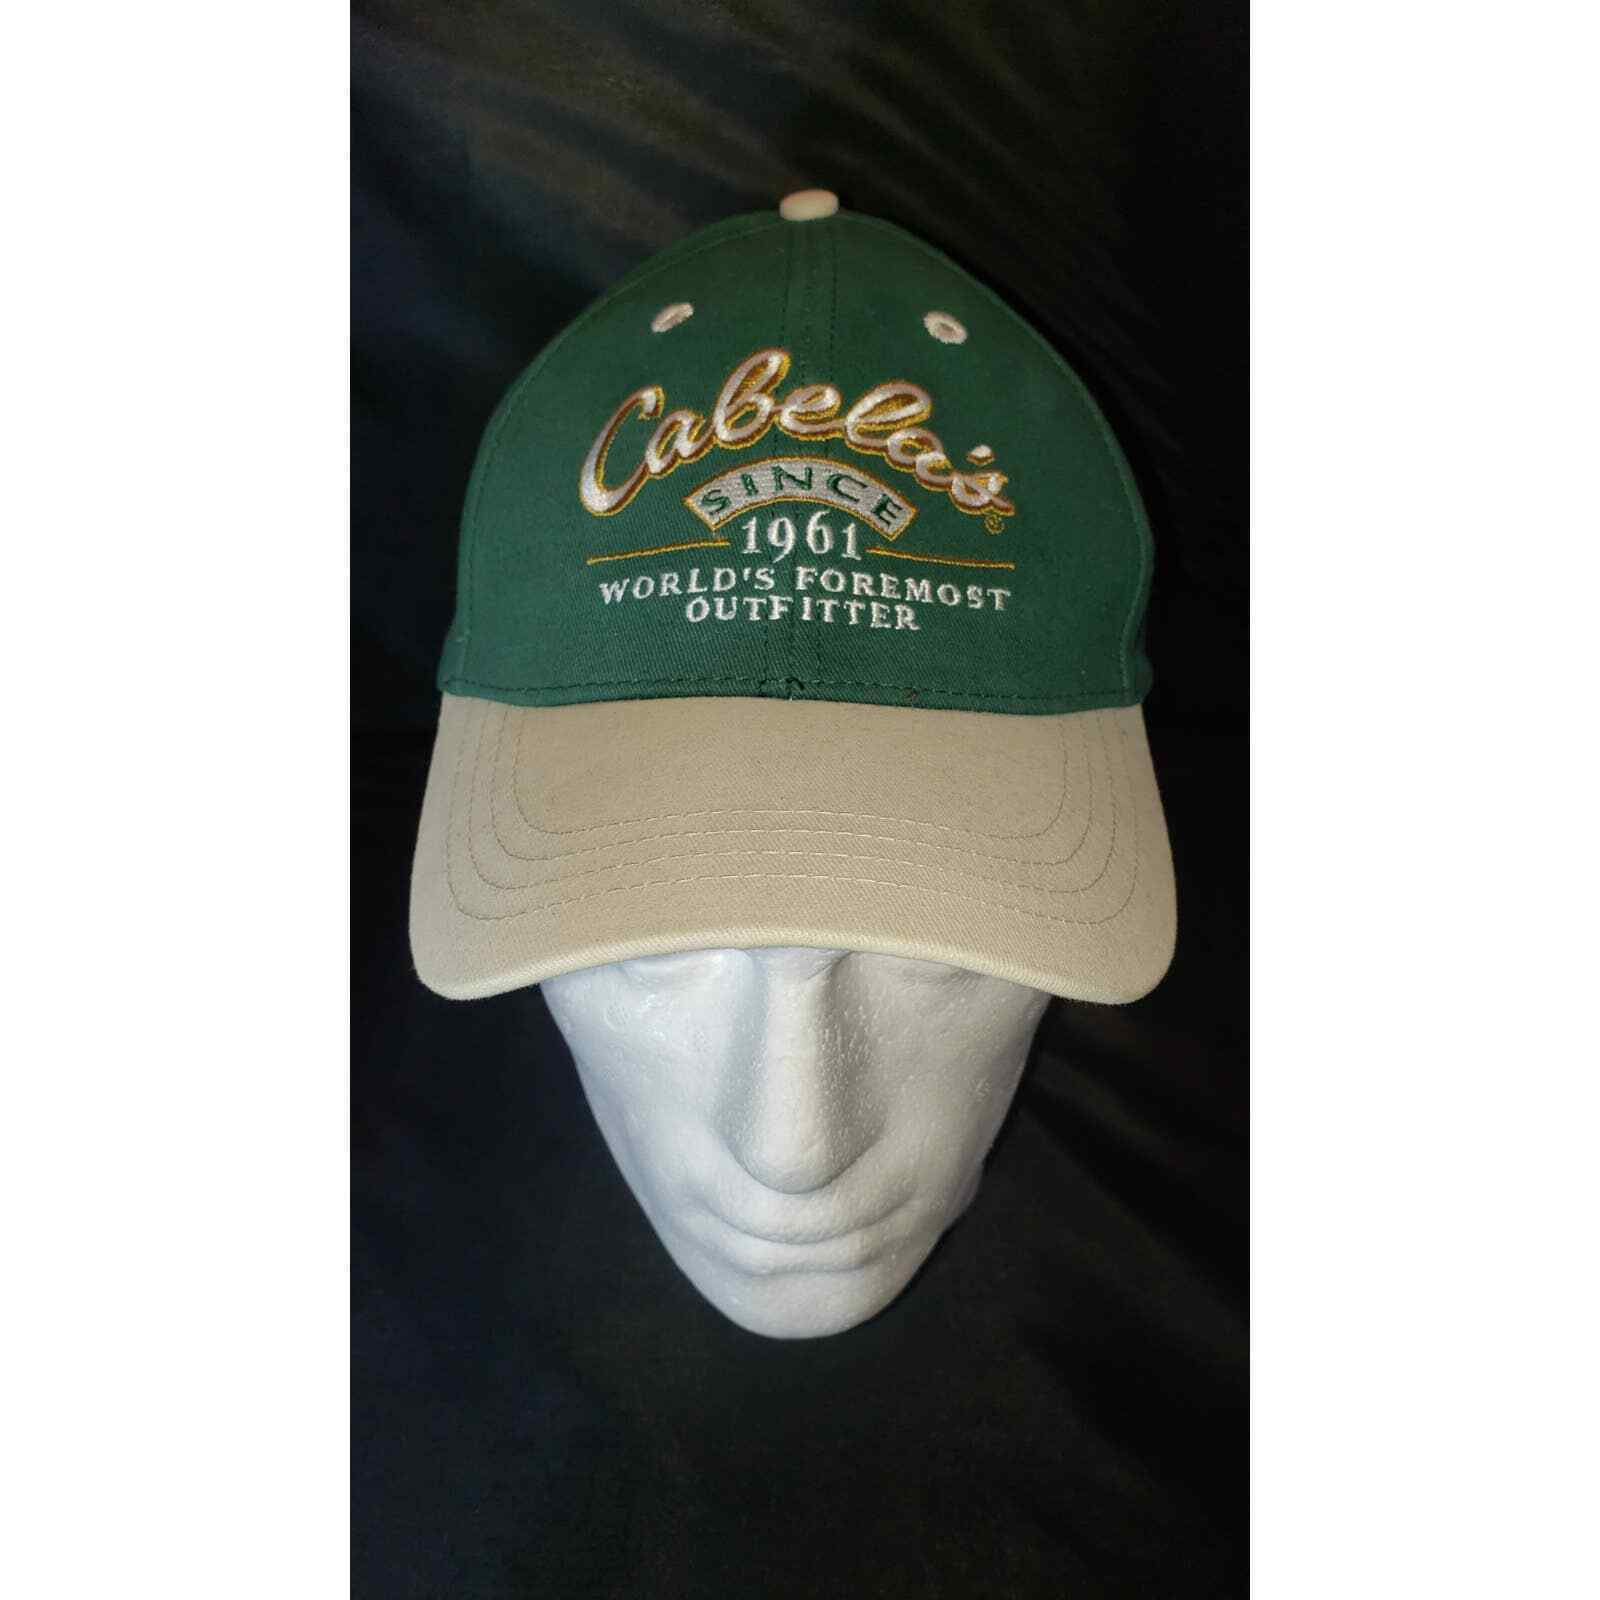 Cabelo's Since 1961 World's Foremost Outfitter Hat